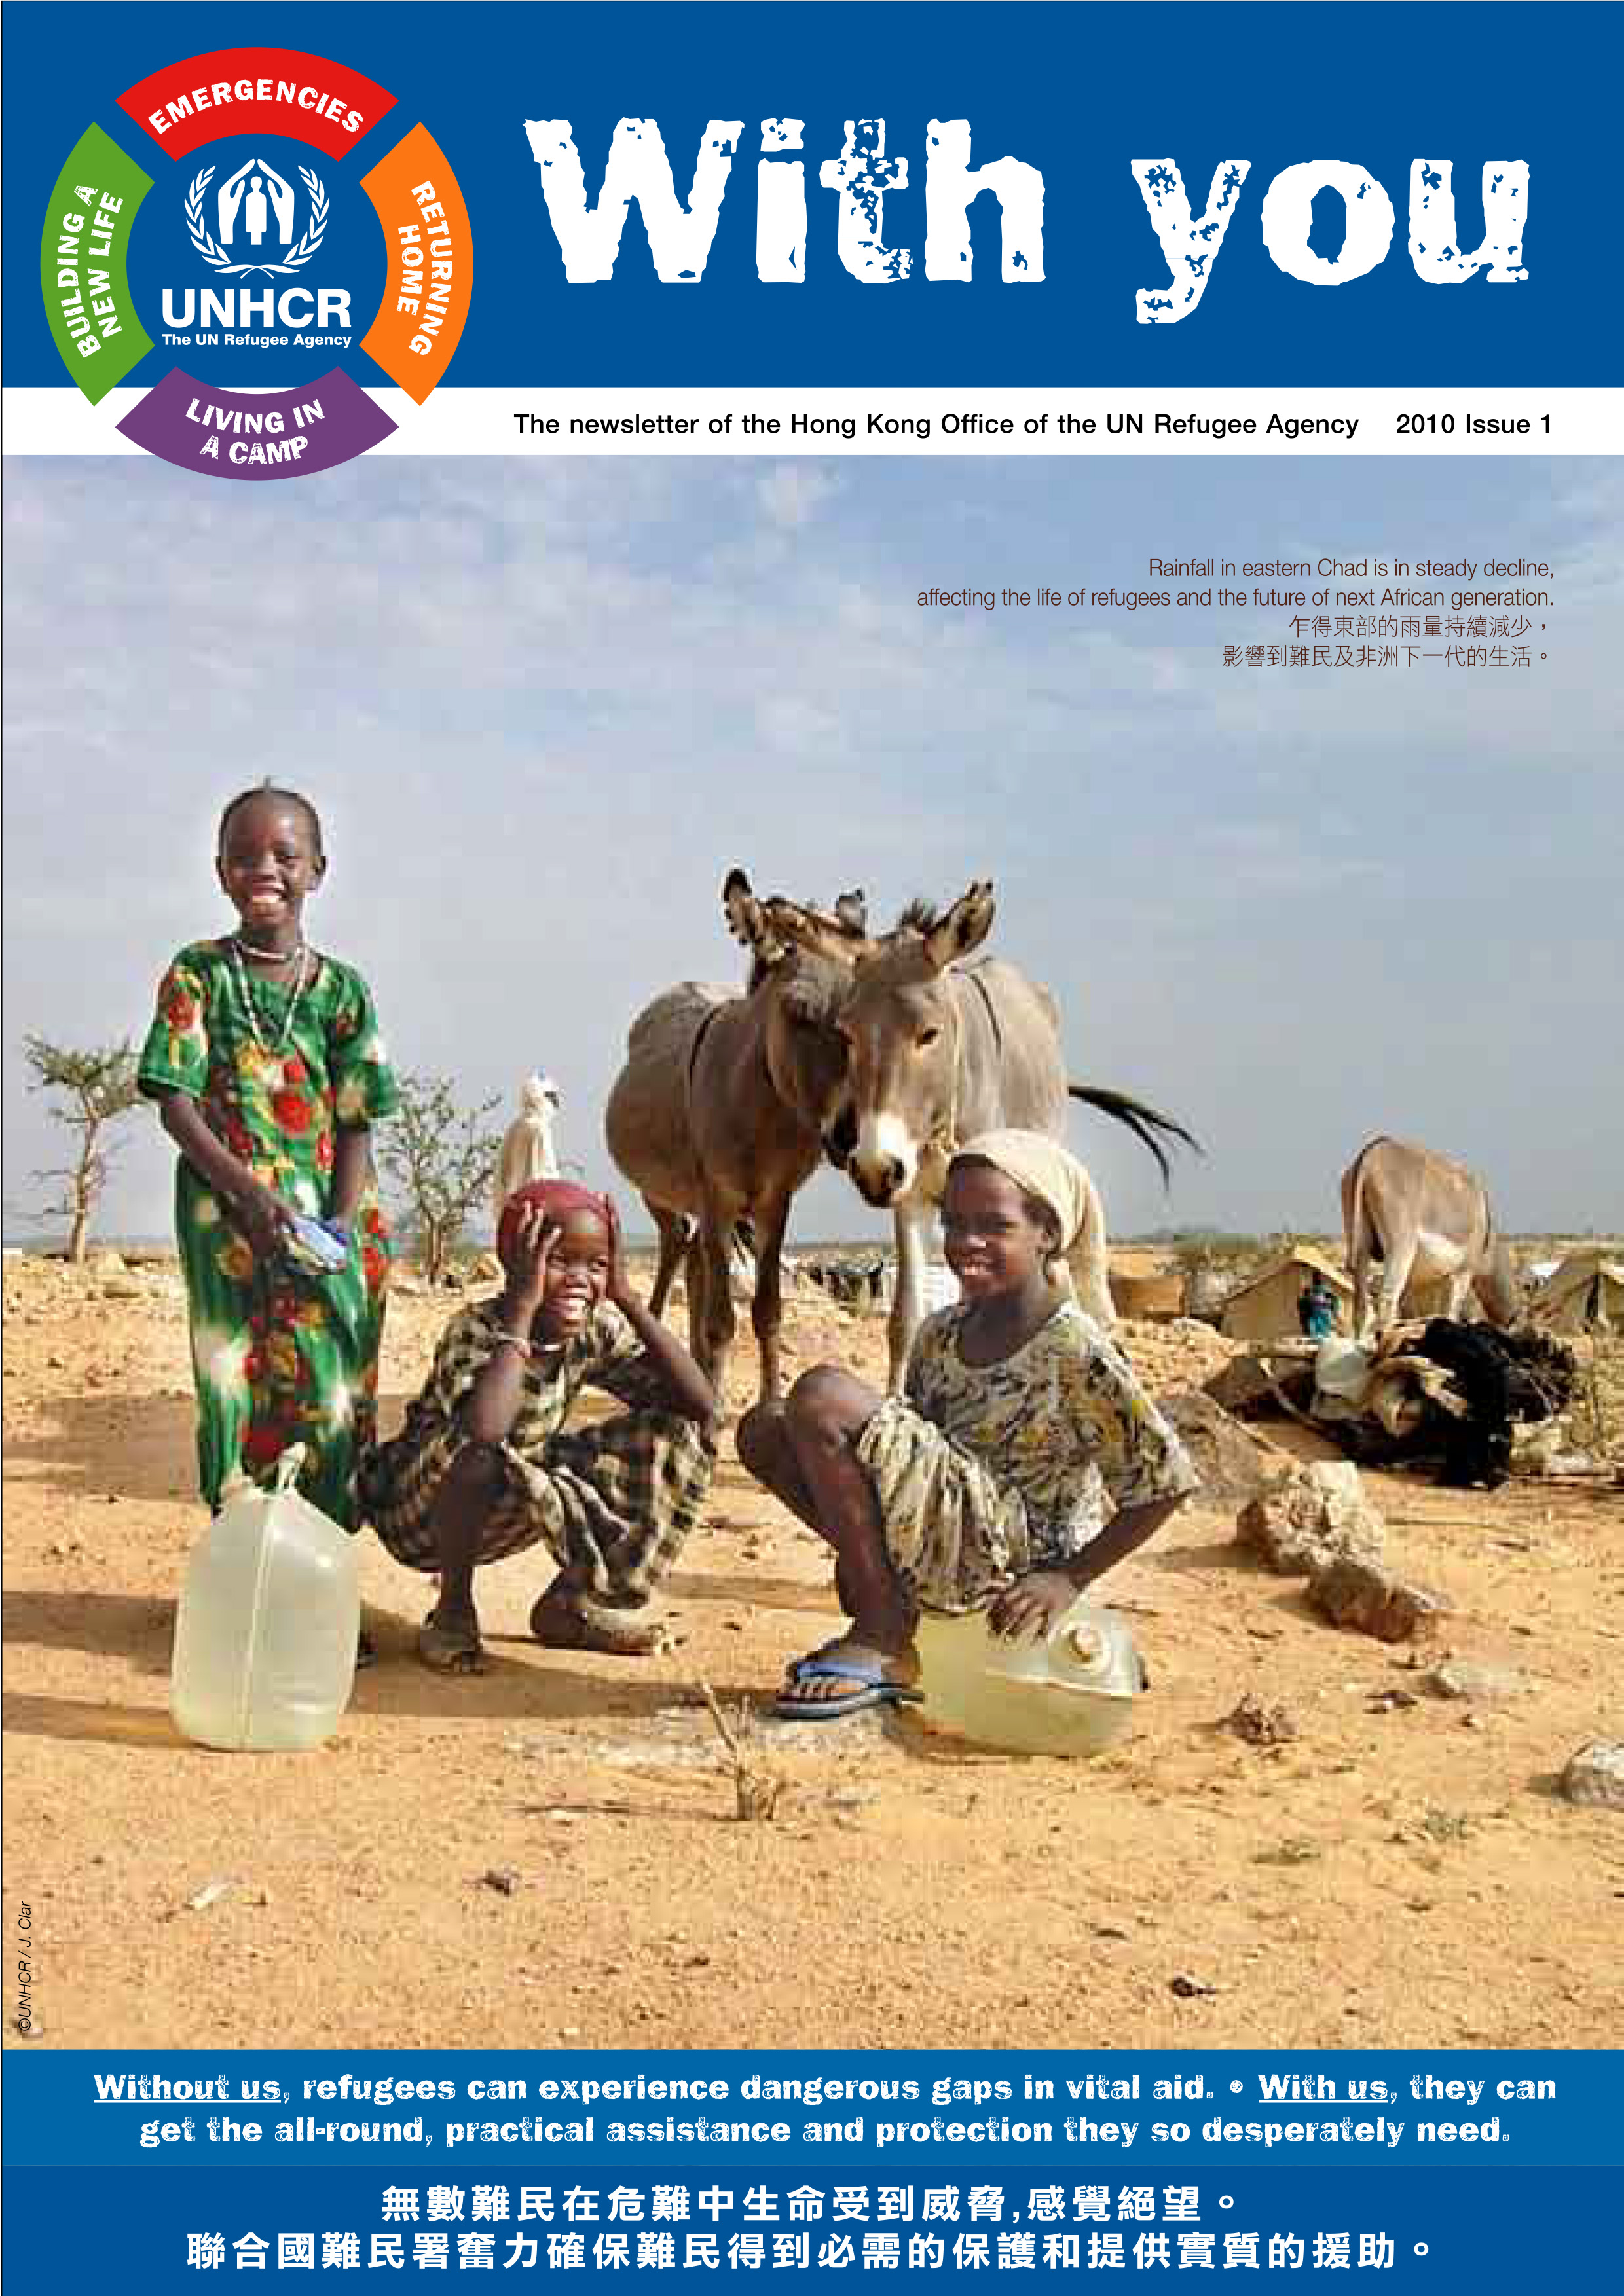 Rainfall in eastern Chad is in steady decline, affecting the life of refugees and the future of next African generation.